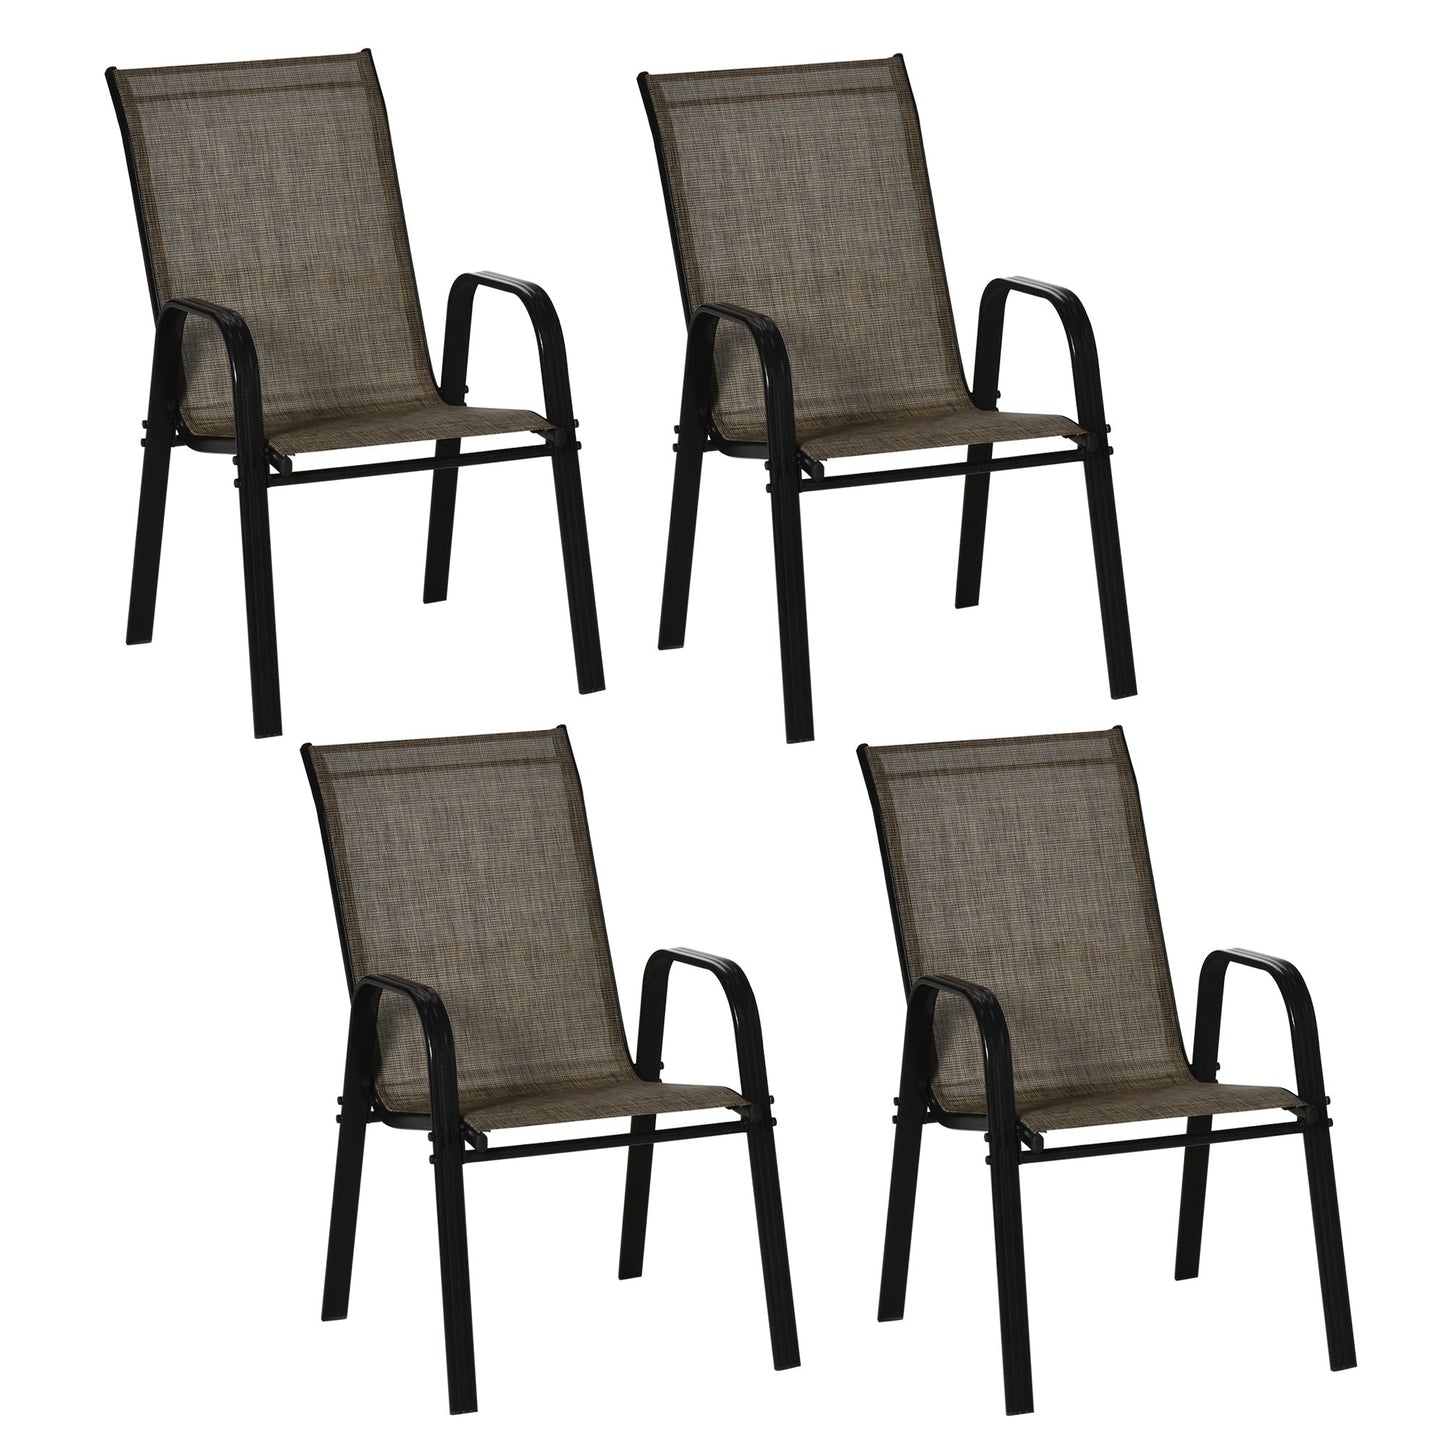 Outsunny Set 4 pieces Garden chairs with armrests, outdoor outdoor chairs in metal and breathable fabric, brown